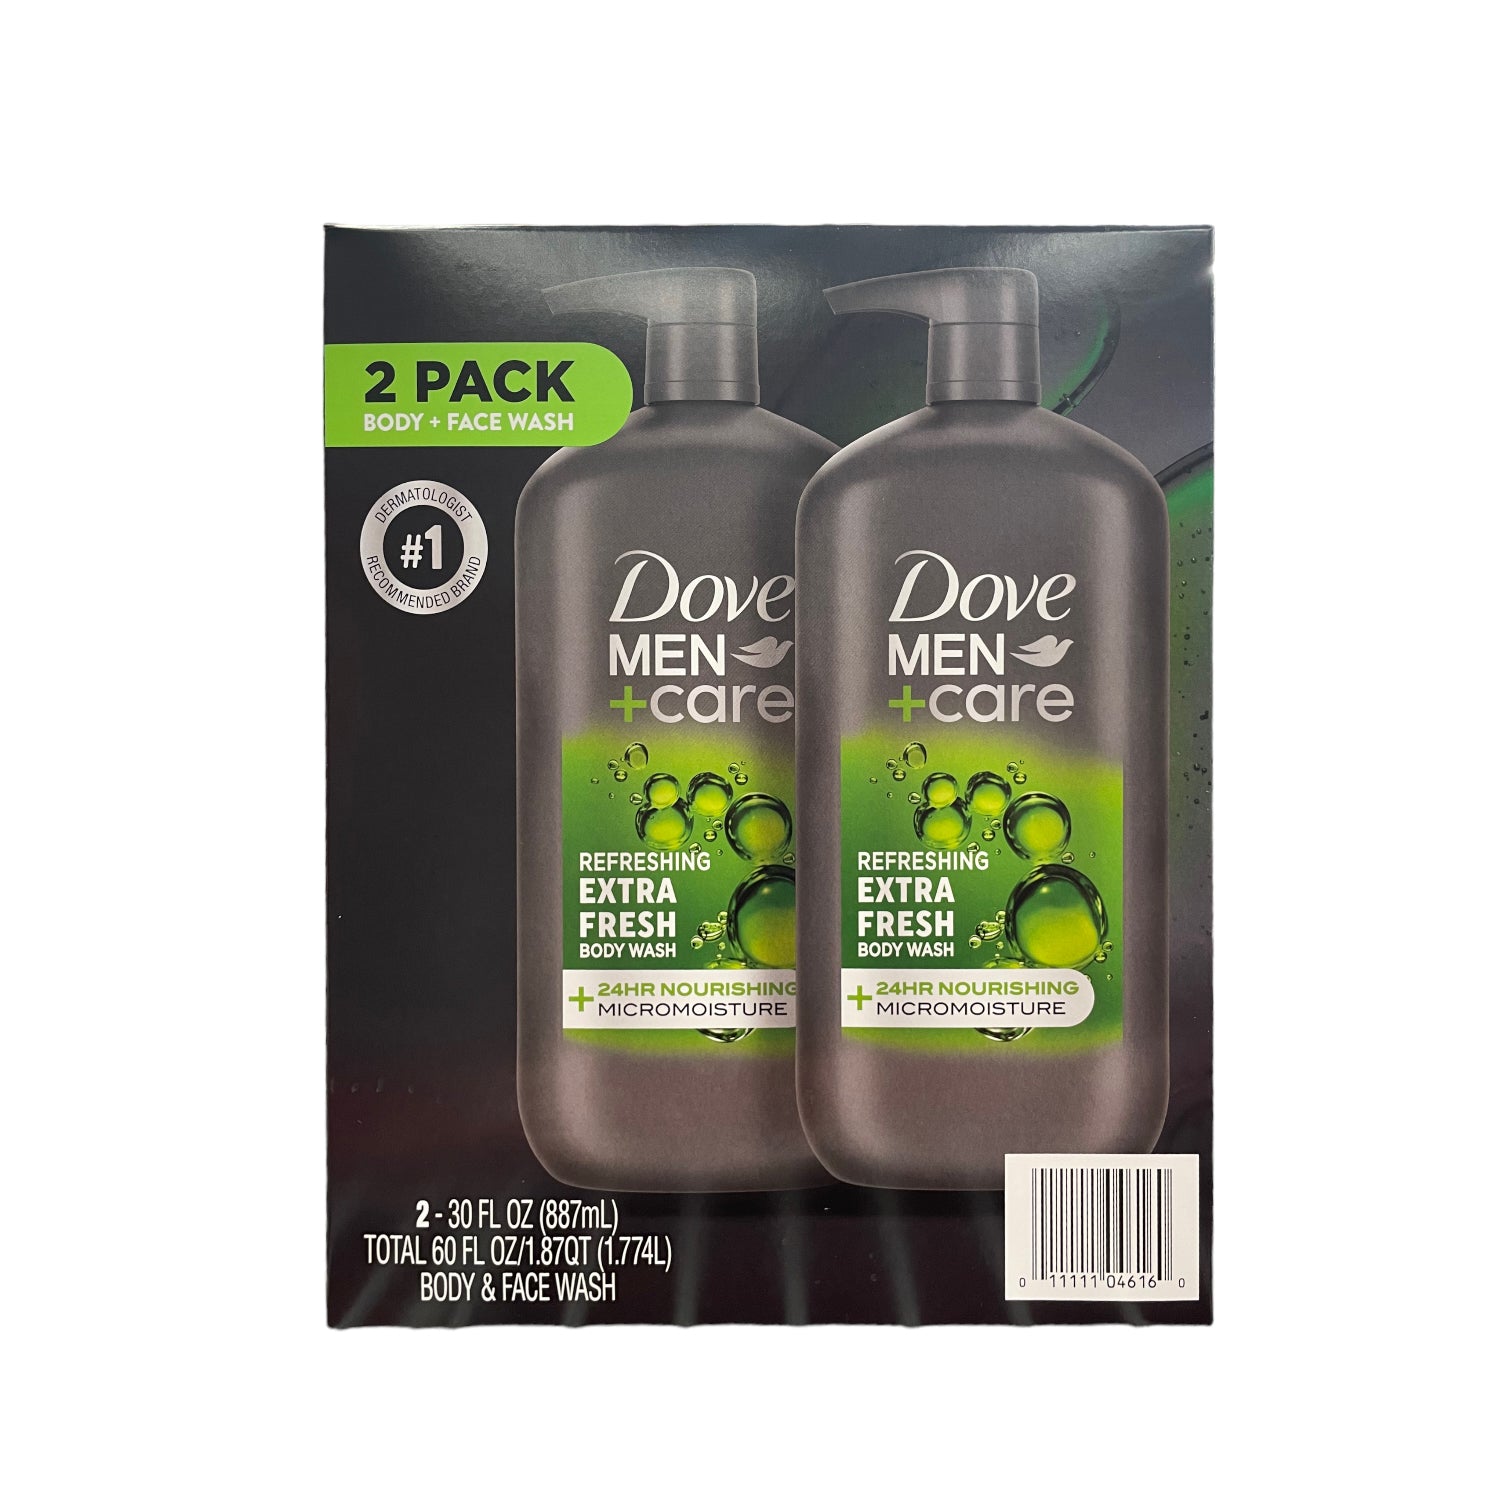 Dove Men +Care, Body and Face Wash, Extra Fresh, 30 oz (2 Pack)